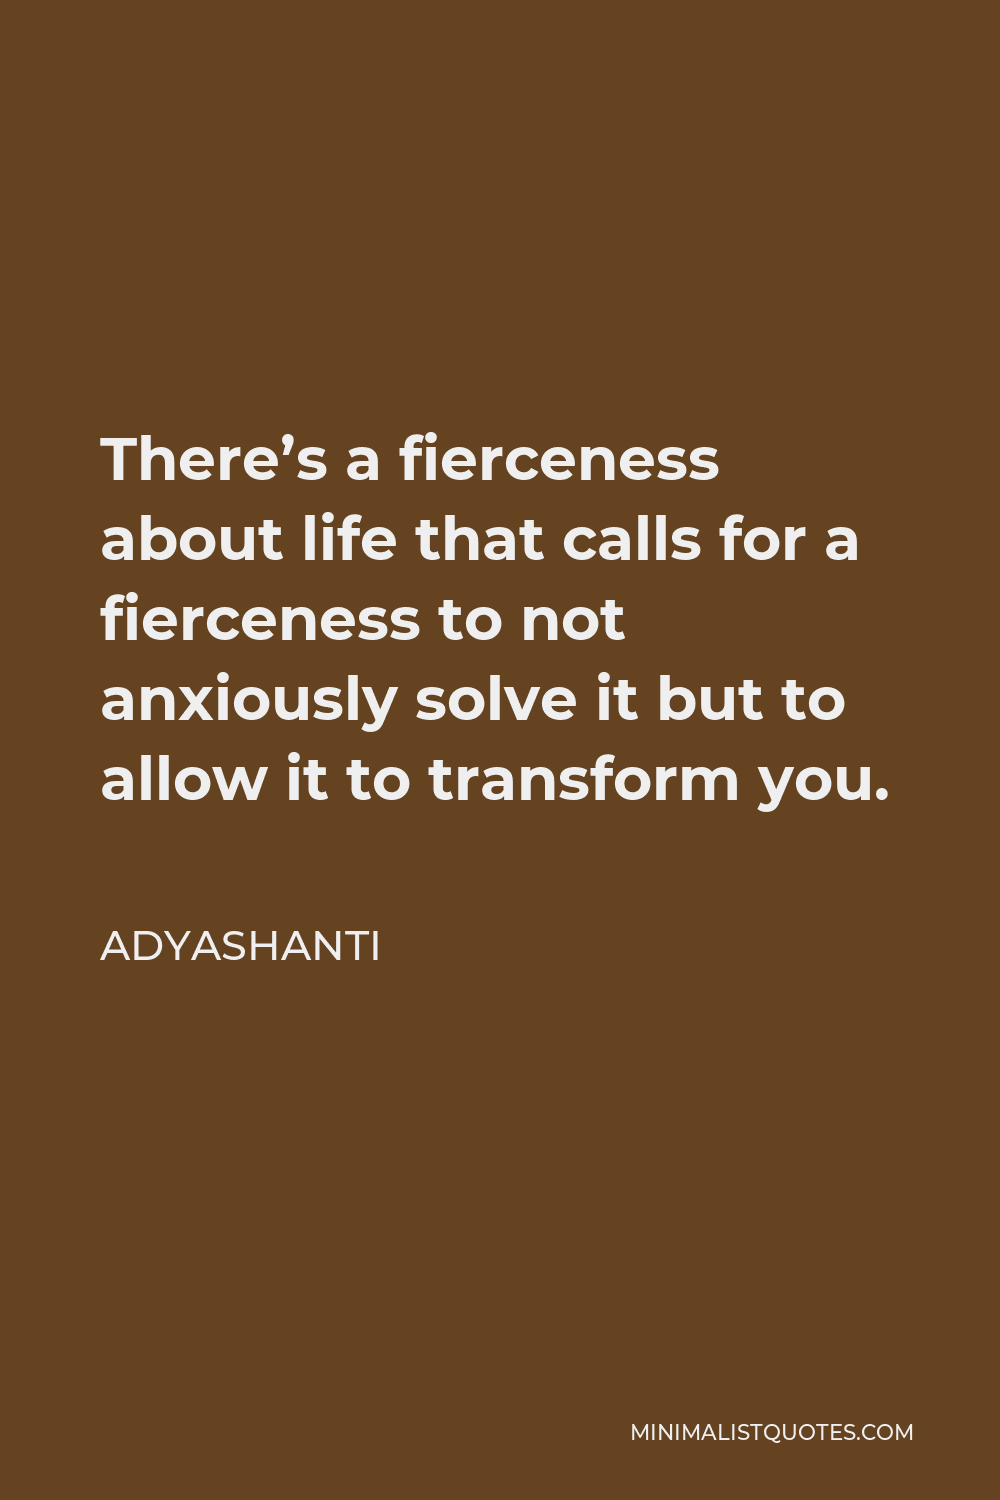 Adyashanti Quote - There’s a fierceness about life that calls for a fierceness to not anxiously solve it but to allow it to transform you.